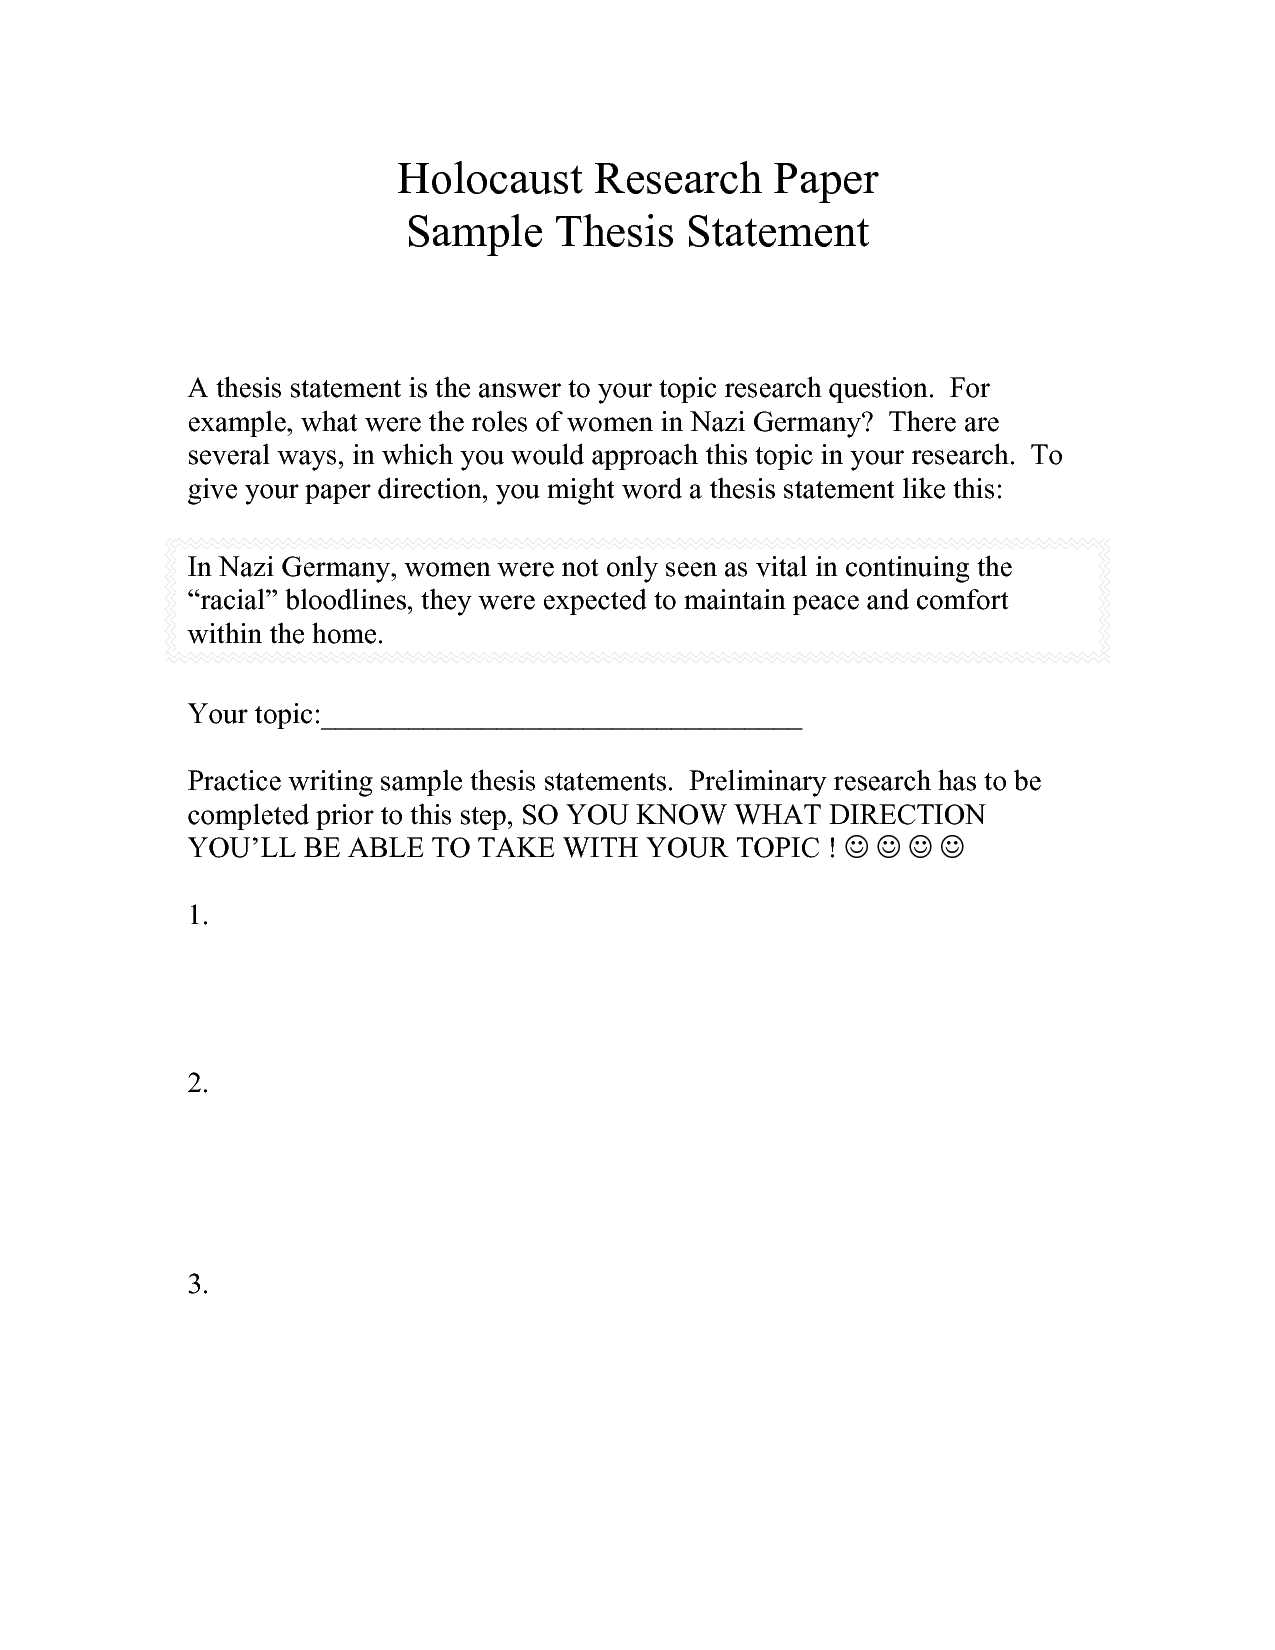 Help with thesis statement research paper